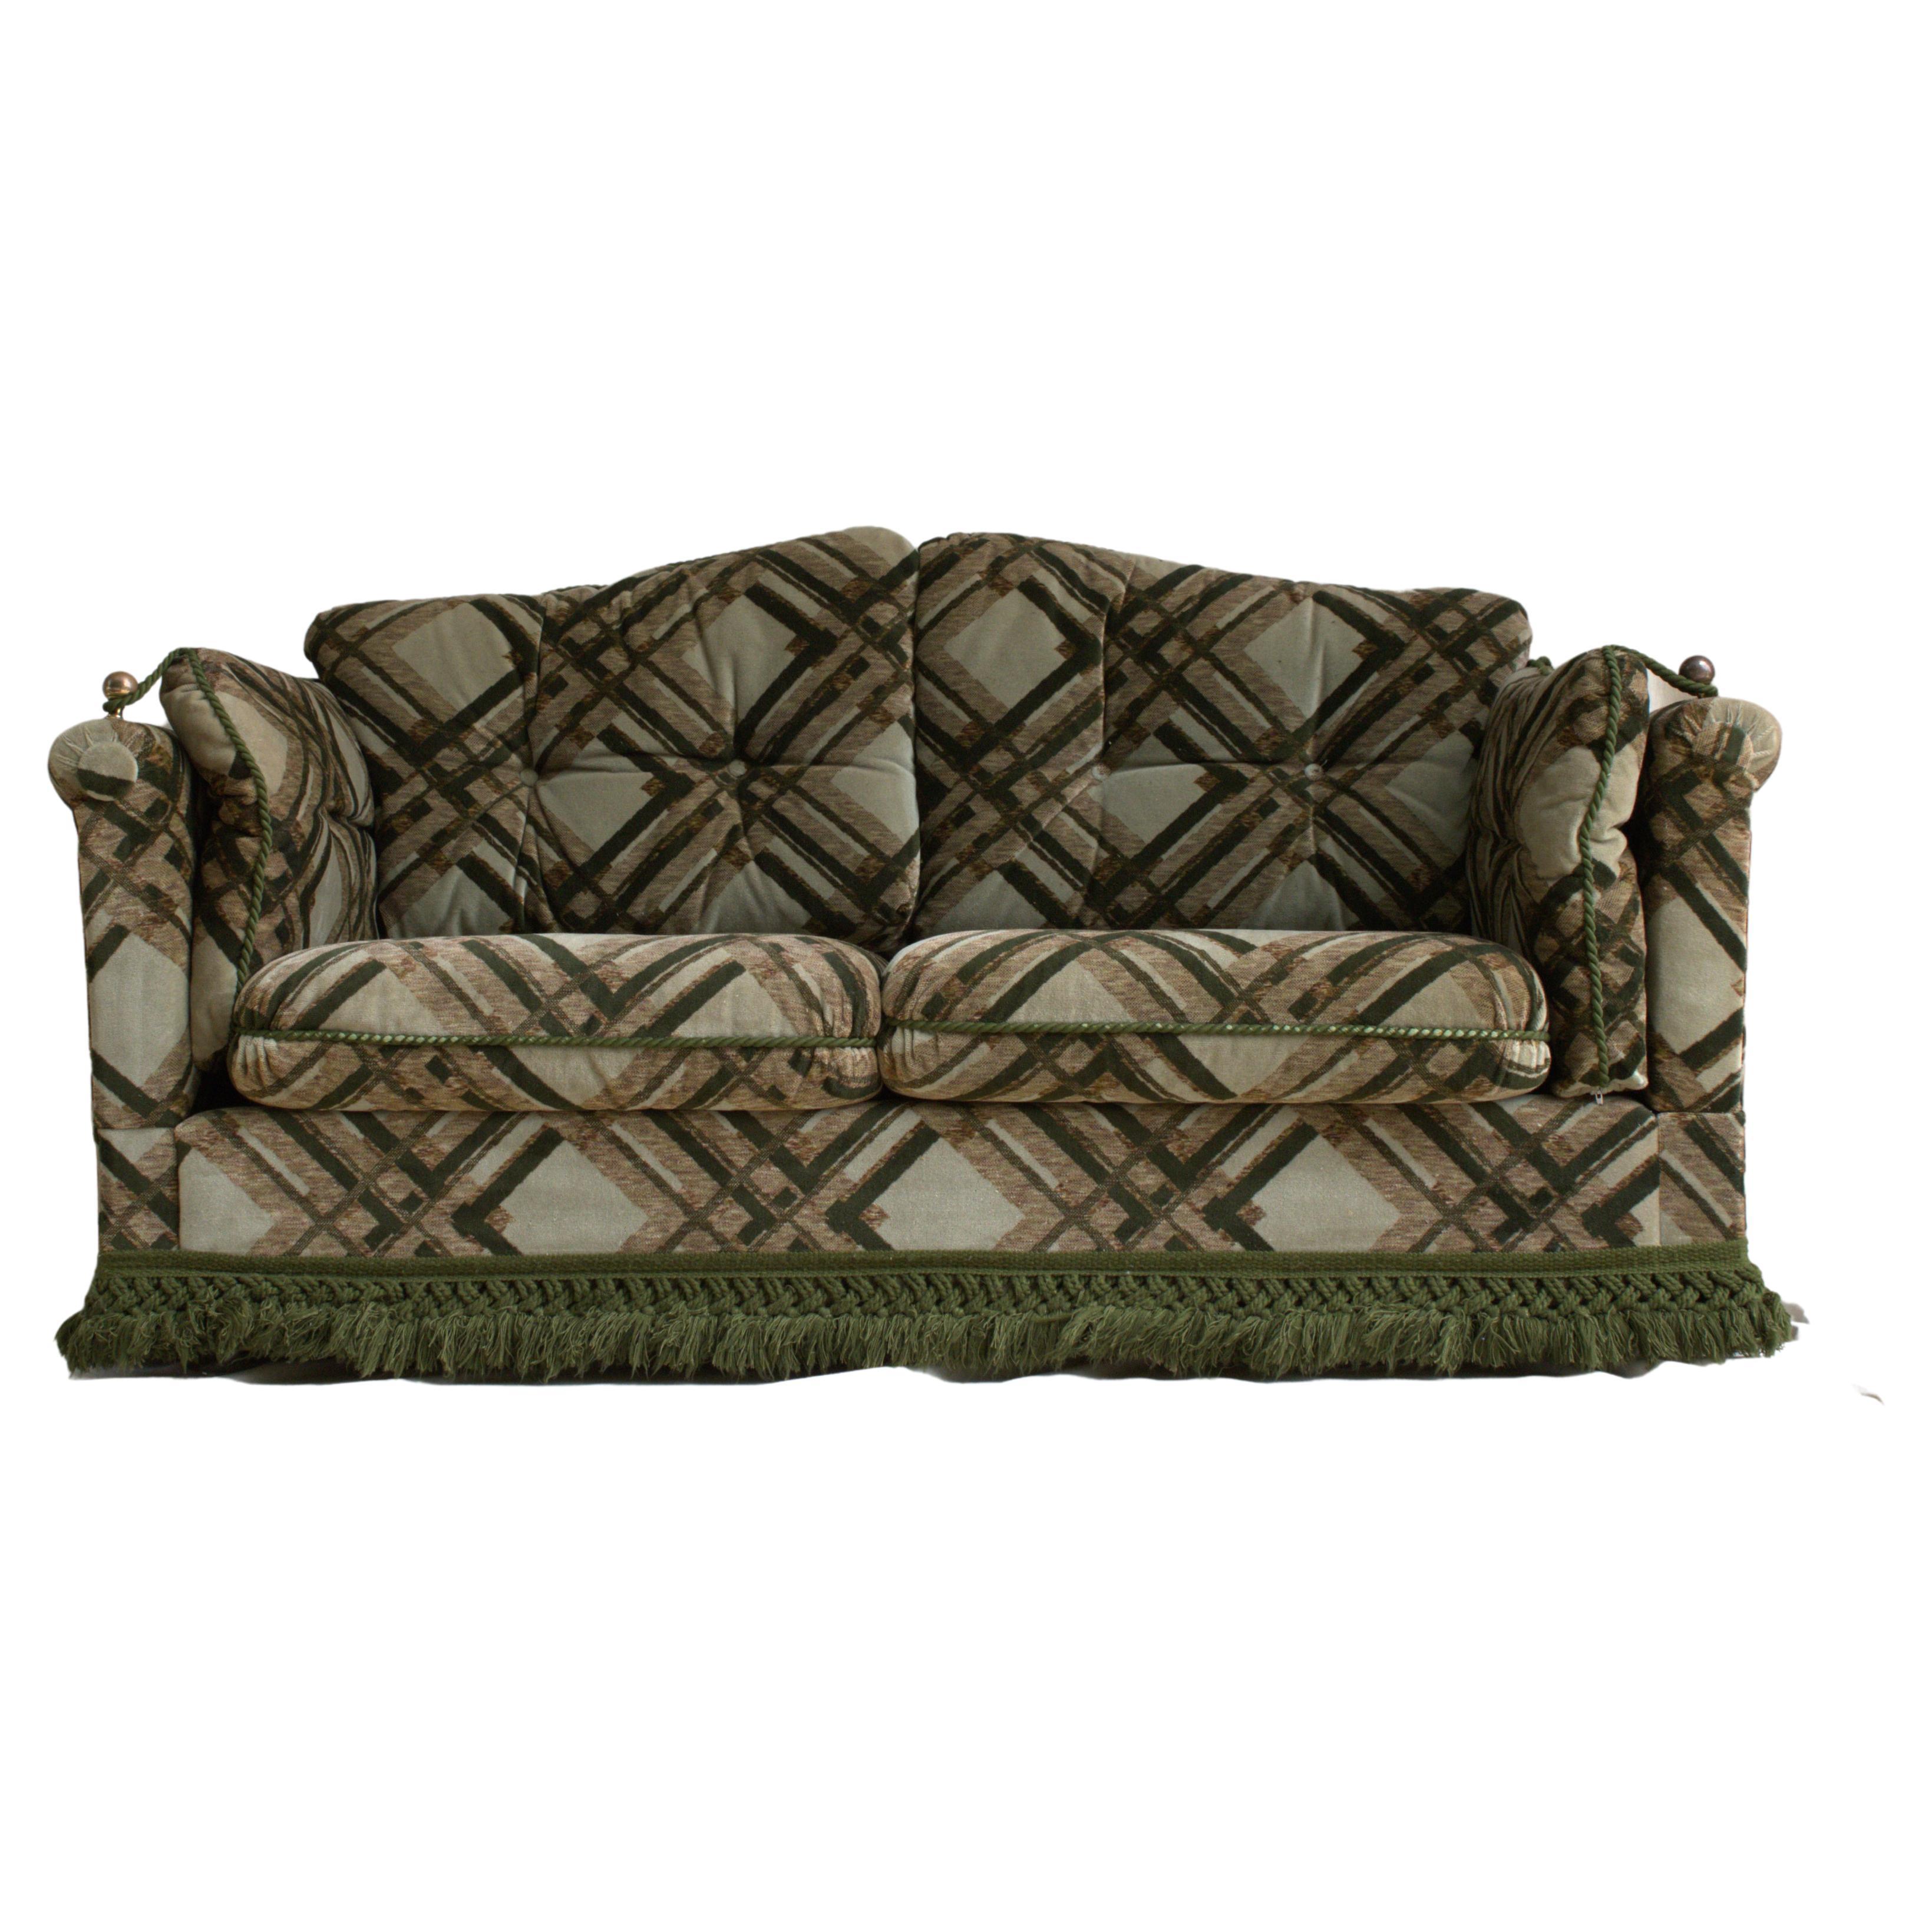 Two-Seater Velvet Sofa by Maison Jansen, with Bronze Accents and Passementerie